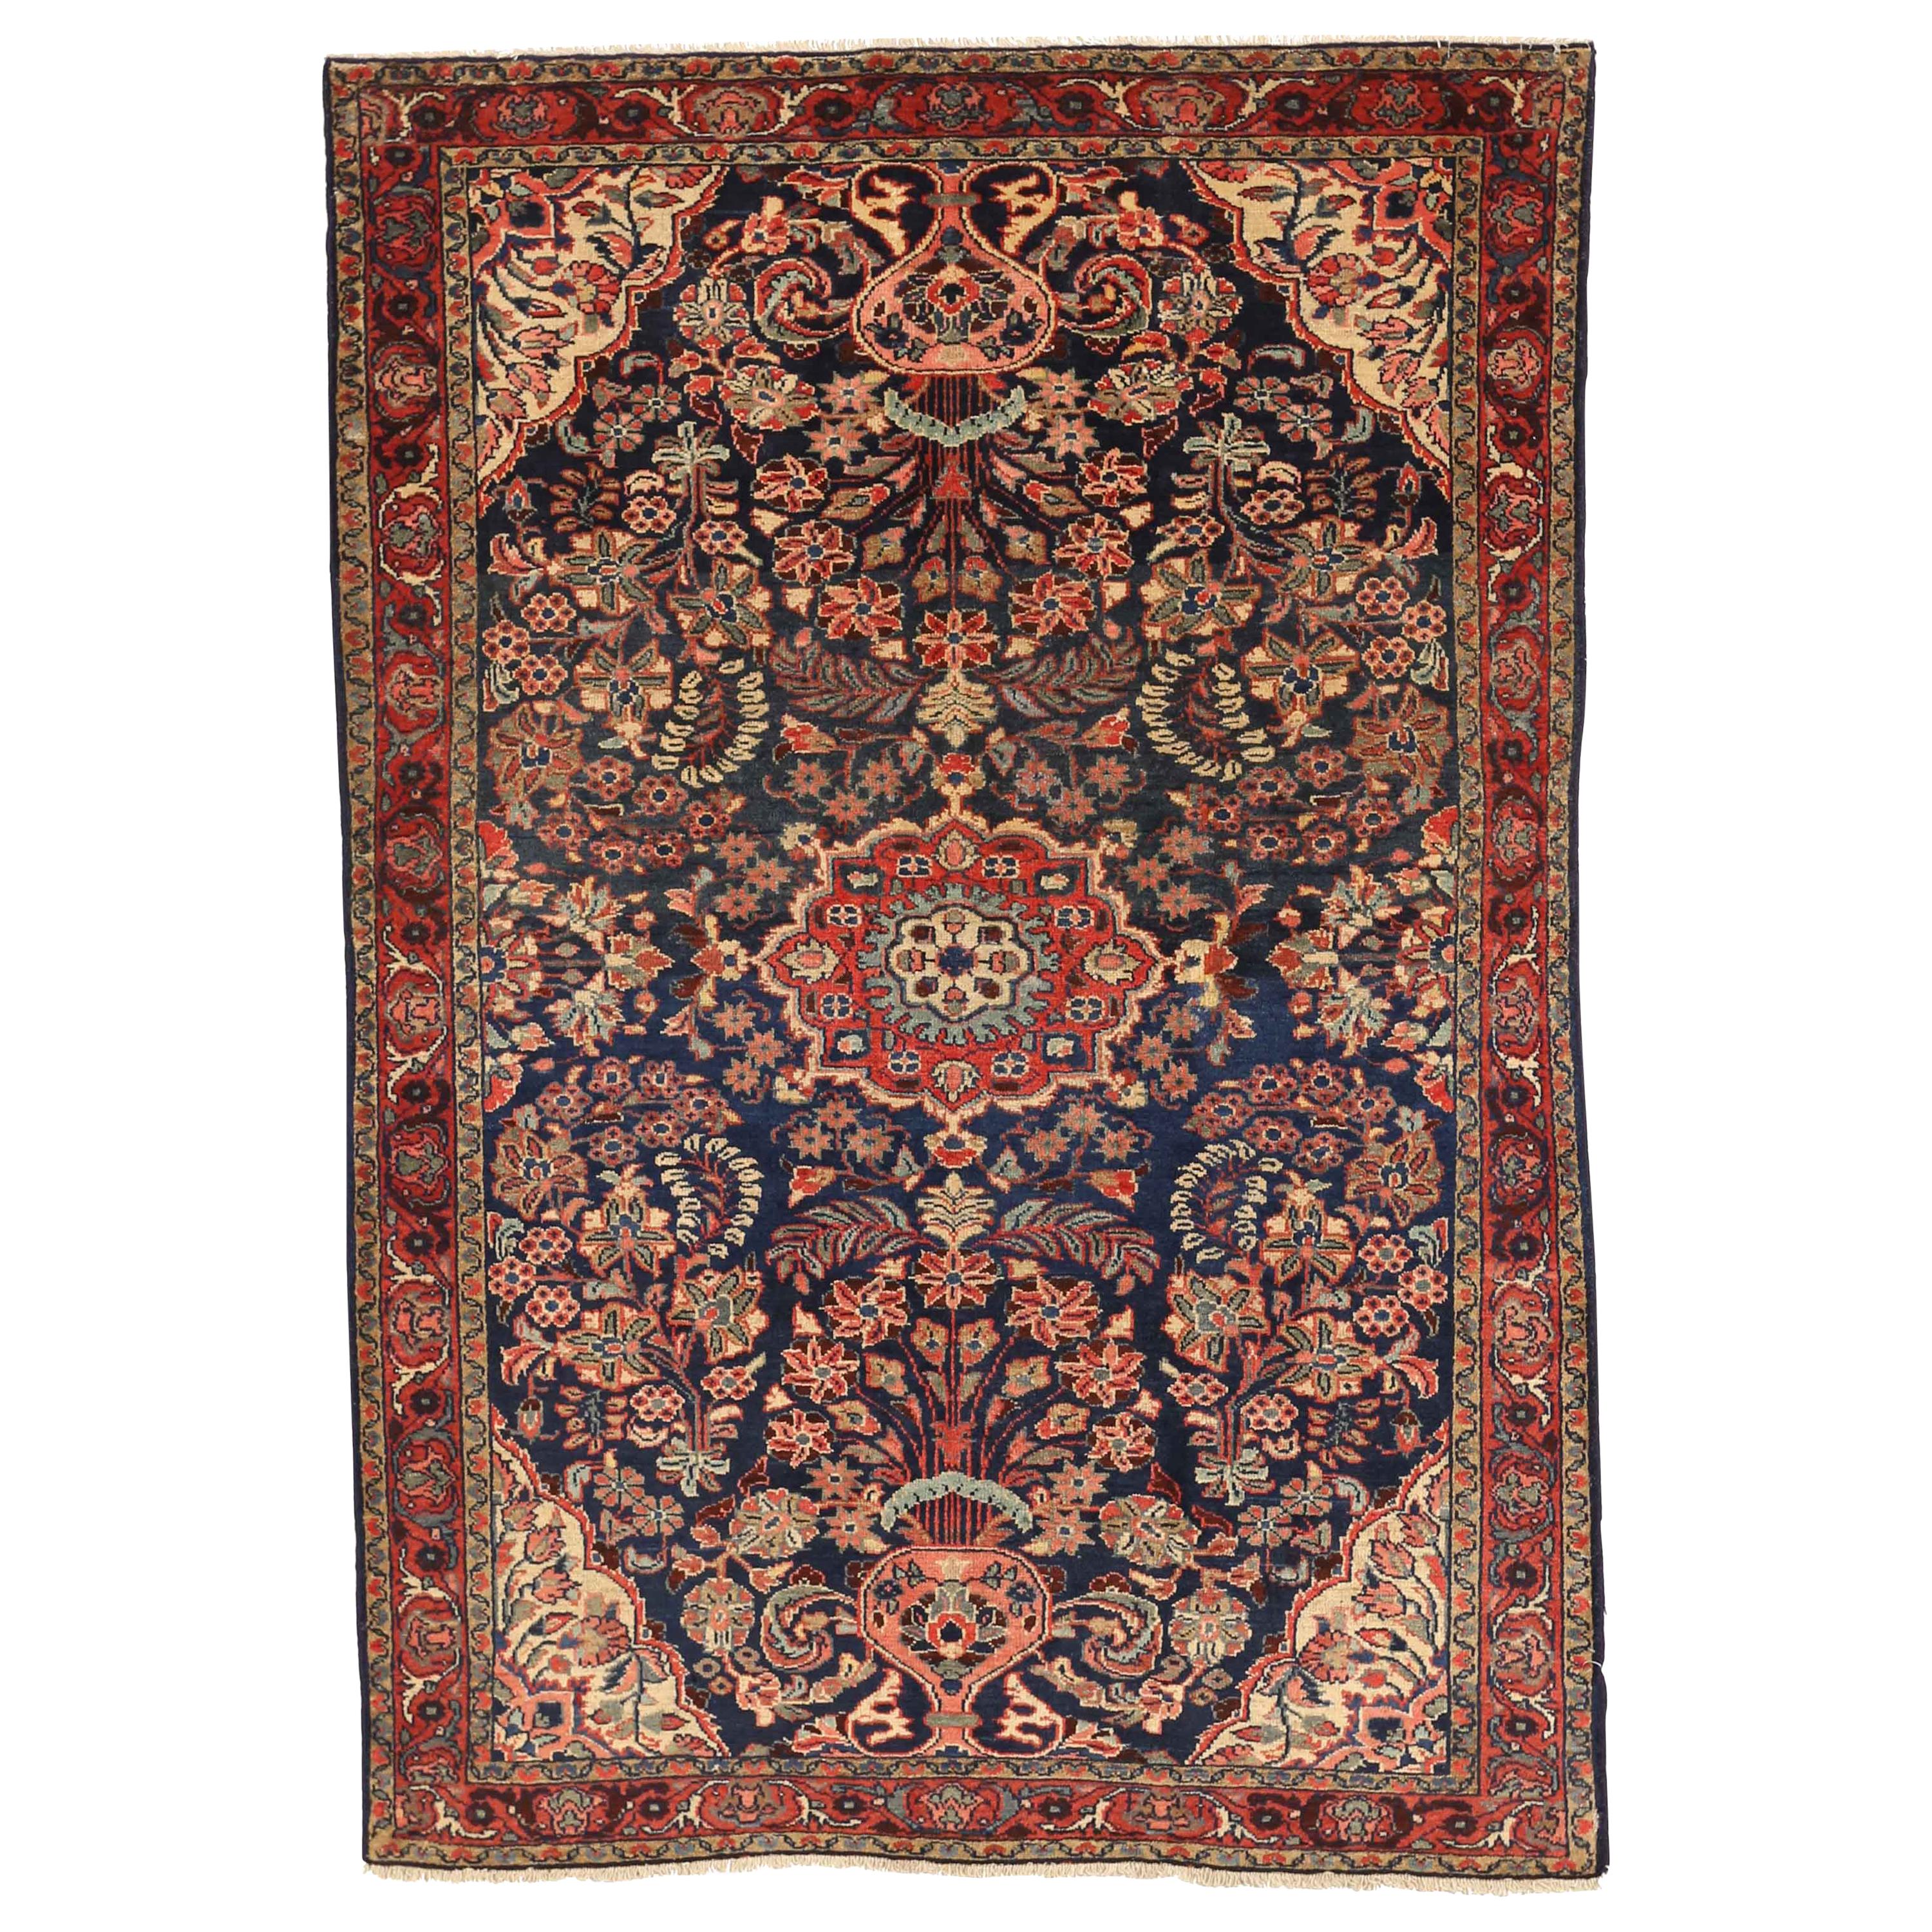 1940s Antique Persian Hamadan Rug with Red & Gray Floral Patterns